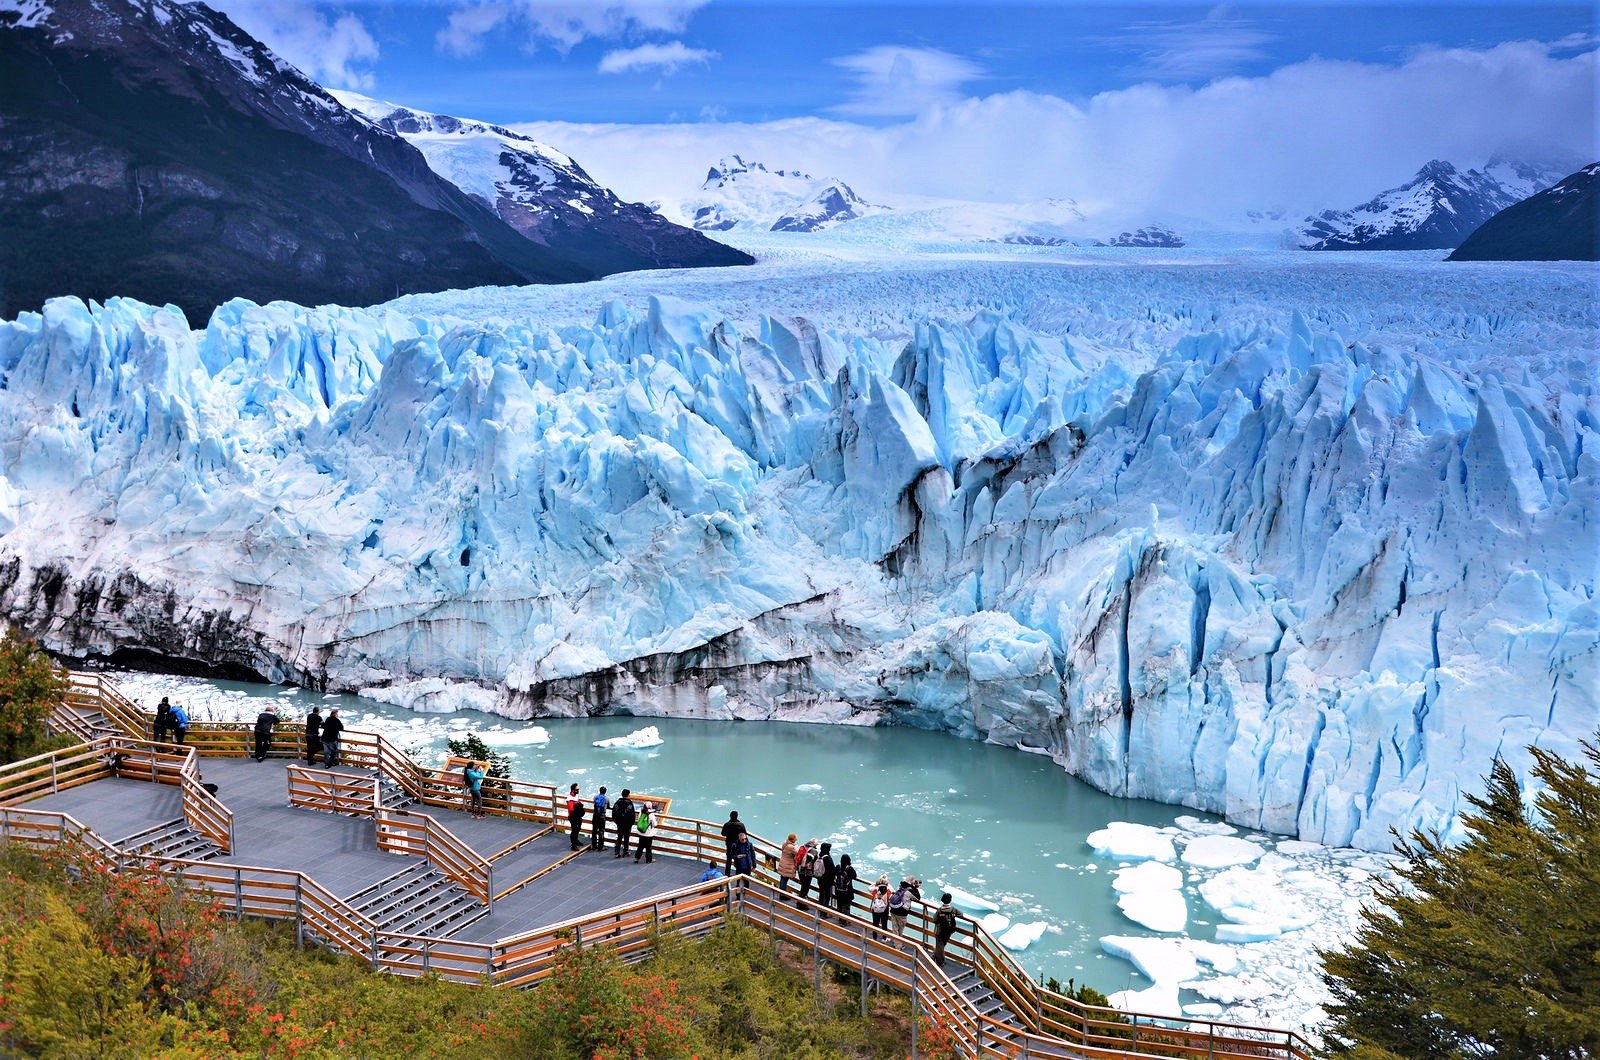 How to see the glacier fall in El-Calafate